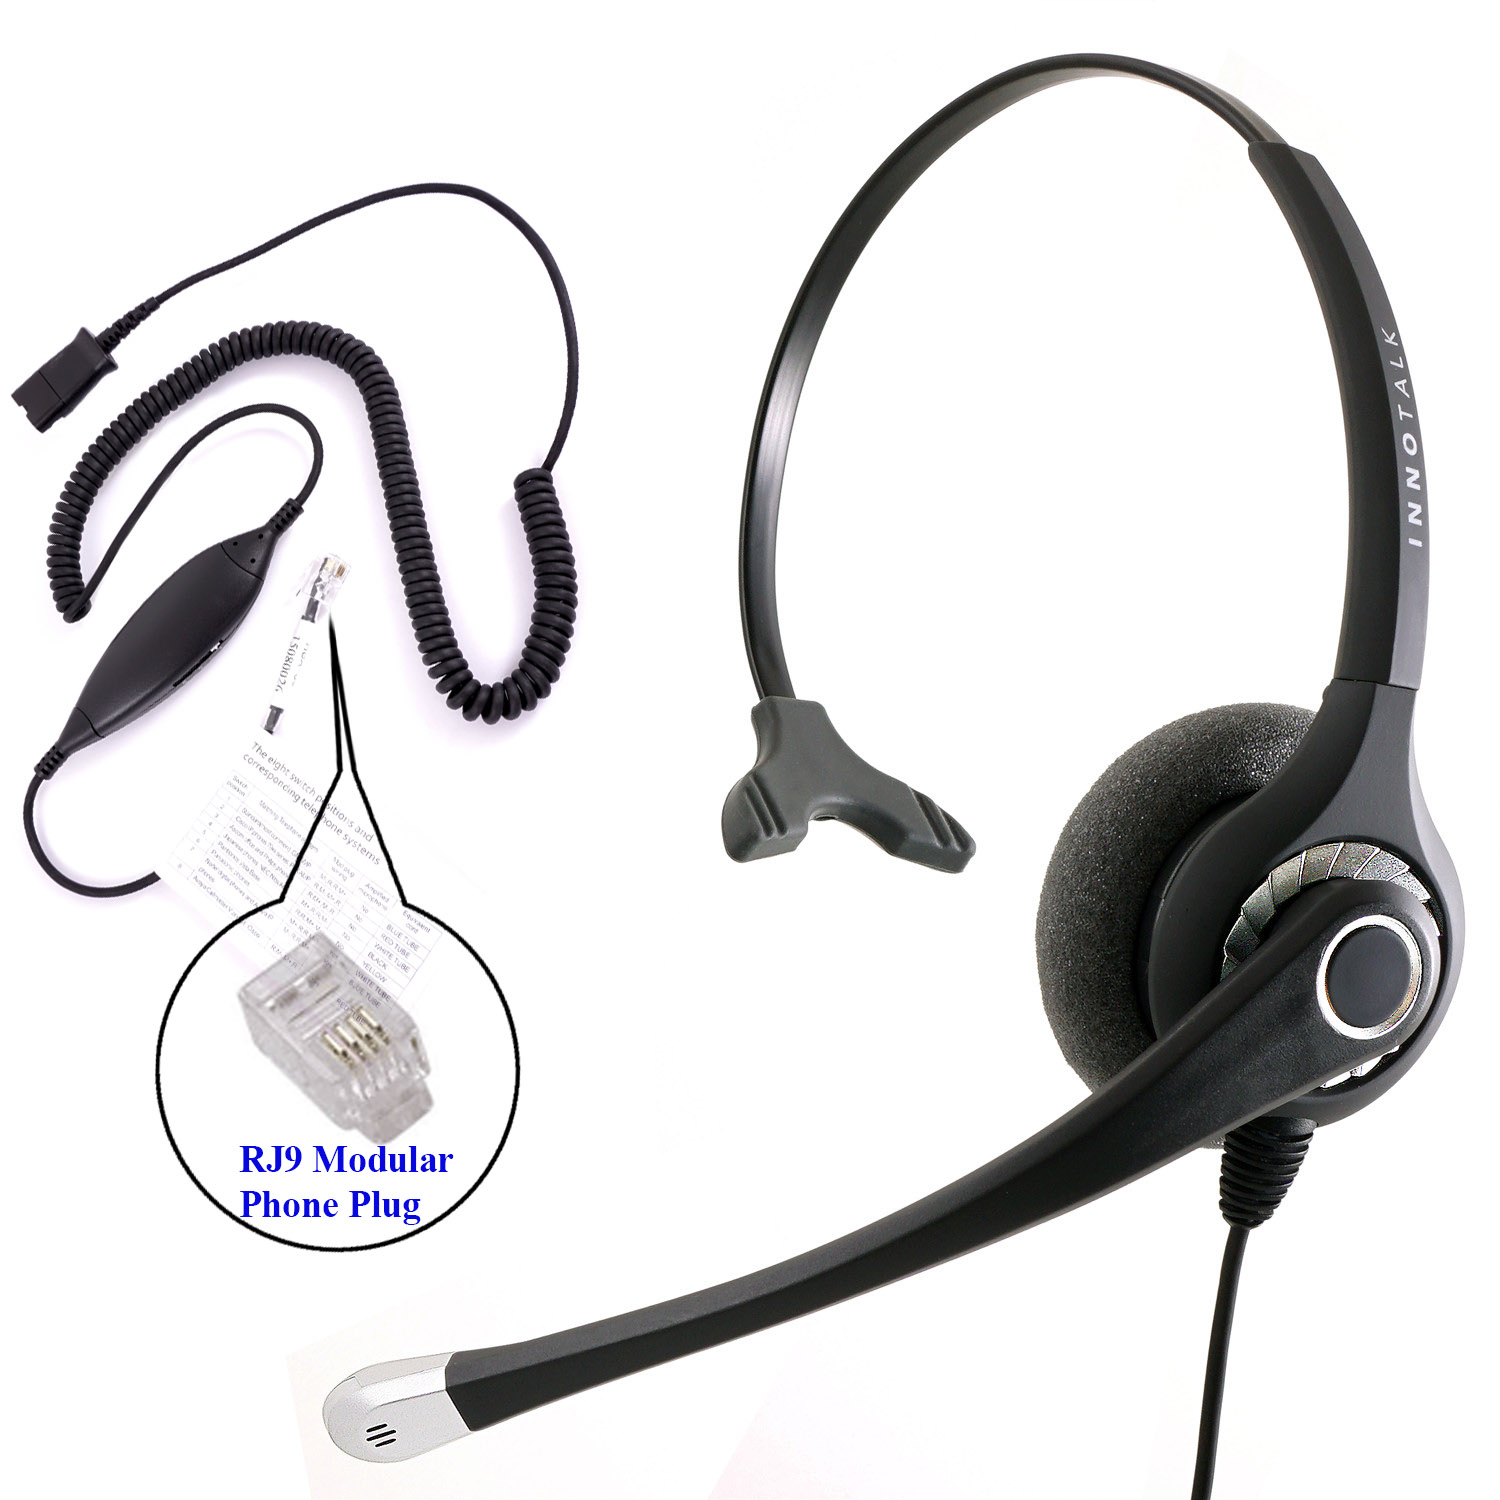 Office Phone Headset with Virtual Compatibility RJ9 Headset Adapter for Cisco Avaya Panasonic and Most Phones - image 1 of 8